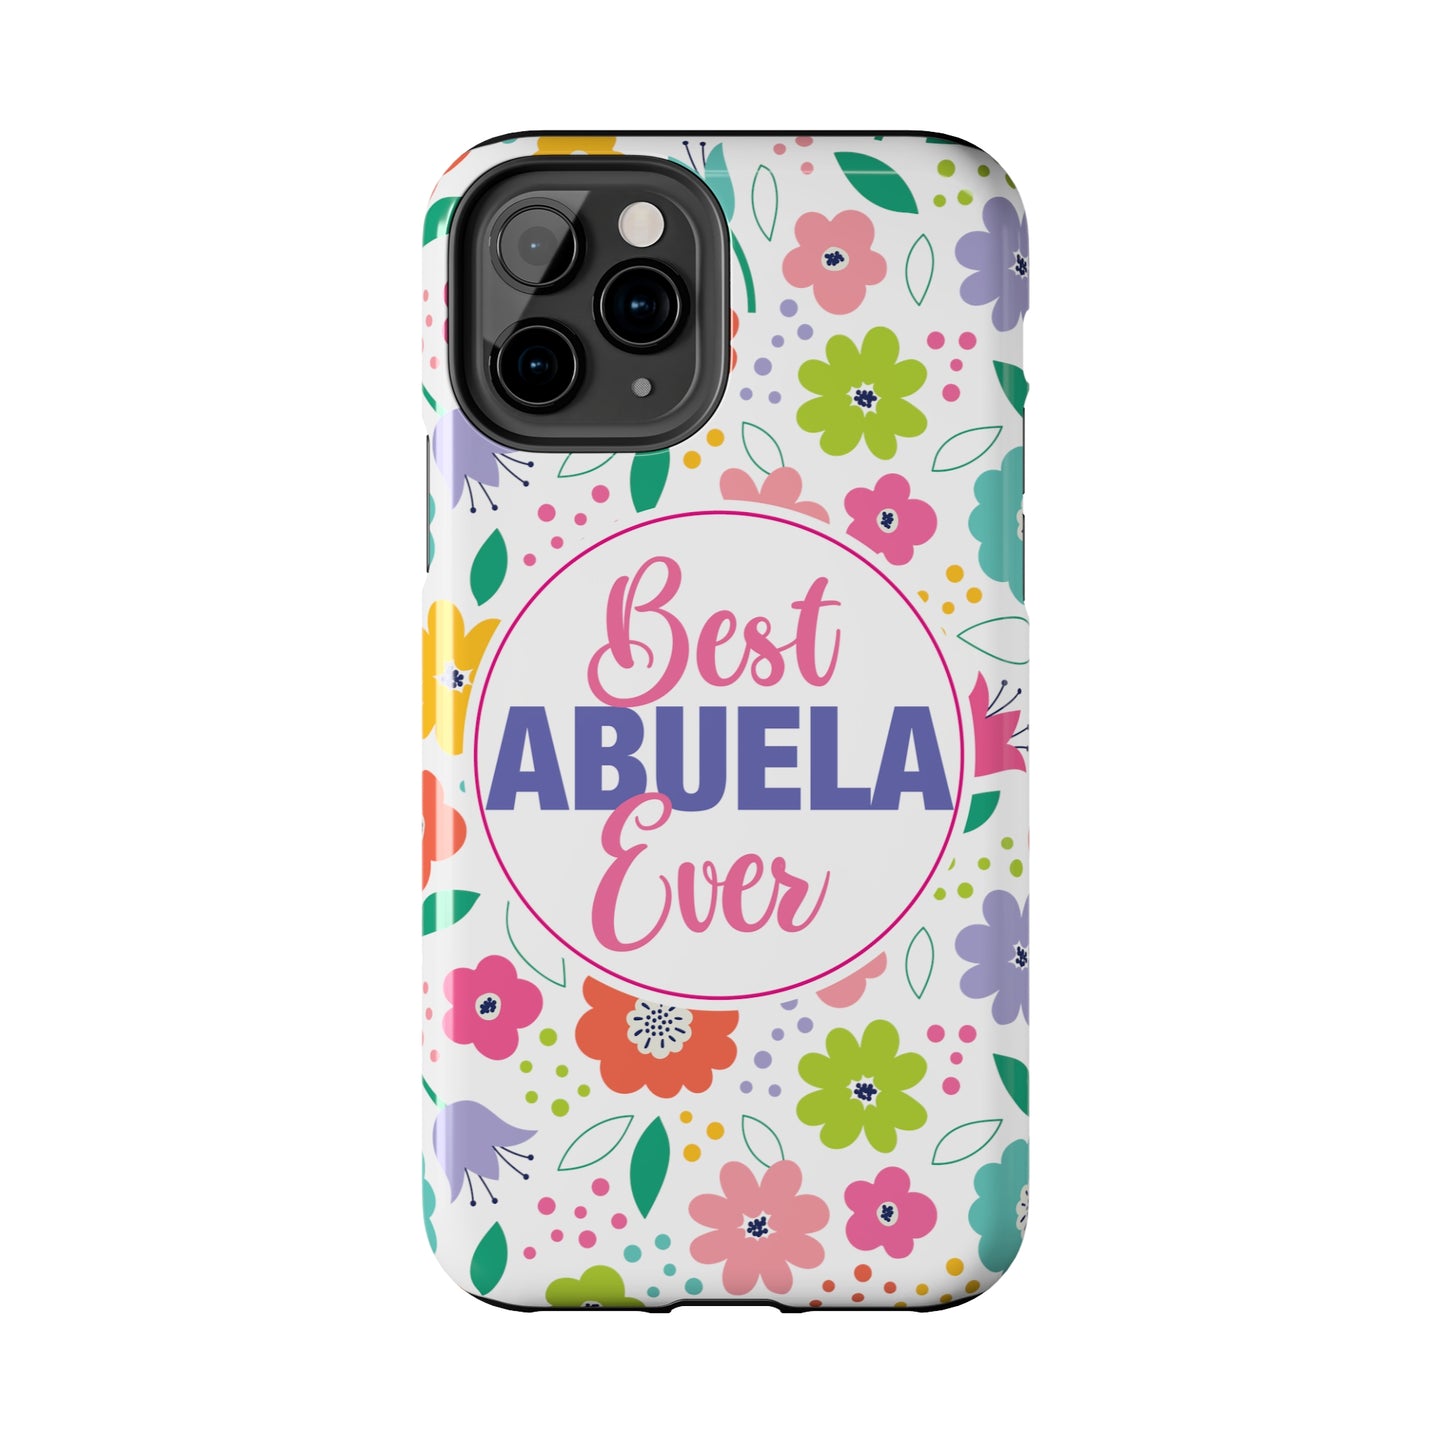 Best Abuela Ever Tough Phone Cases, Case-Mate, Mothers Day Gift